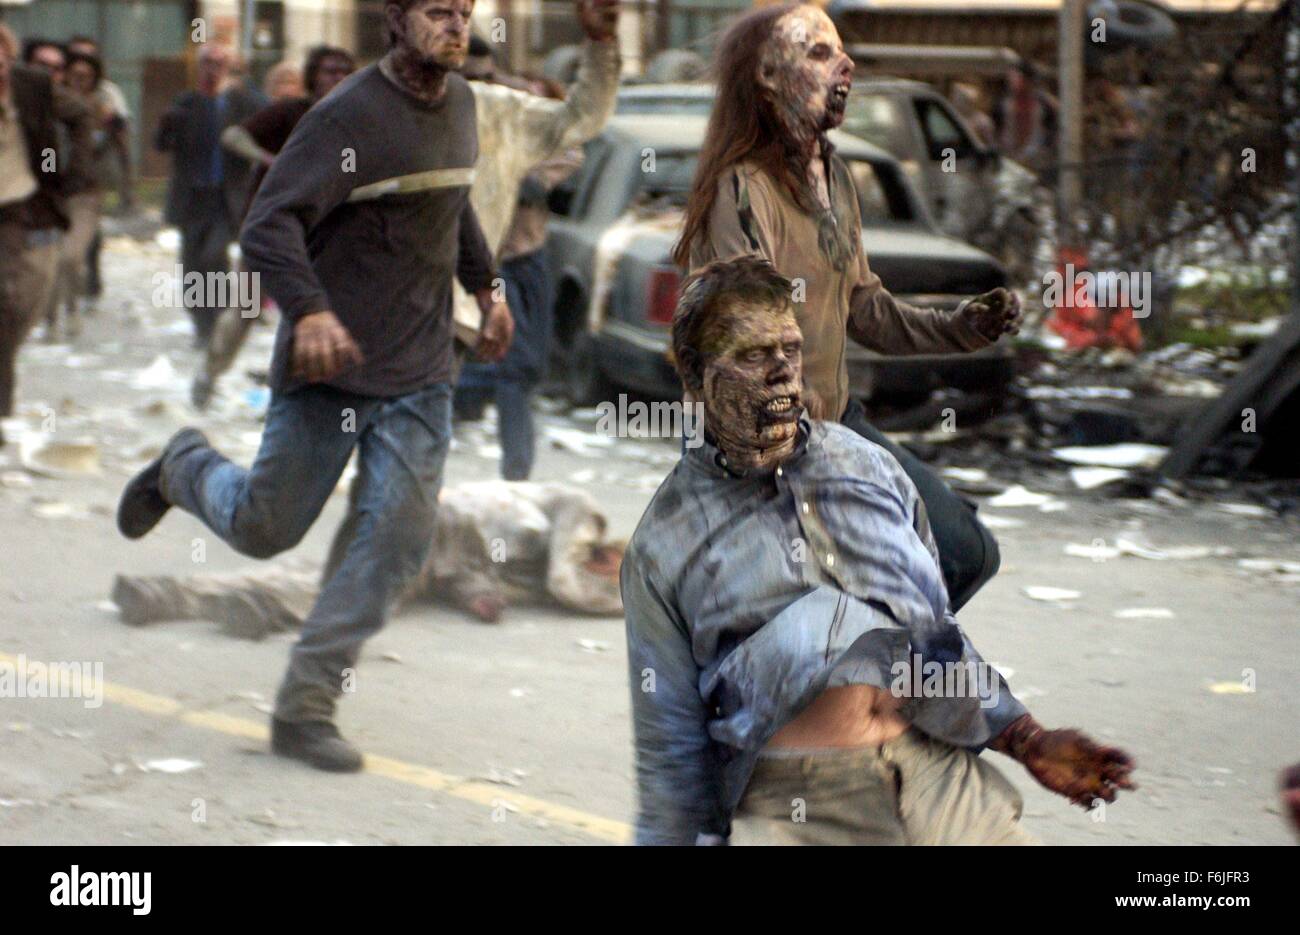 RELEASE DATE: March 19, 2004. MOVIE TITLE: Dawn of the Dead. STUDIO: Strike Entertainment. PLOT: A nurse, a policeman, a young married couple, a salesman, and other survivors of a worldwide plague that is producing aggressive, flesh-eating zombies, take refuge in a mega Midwestern shopping mall. PICTURED: . Stock Photo